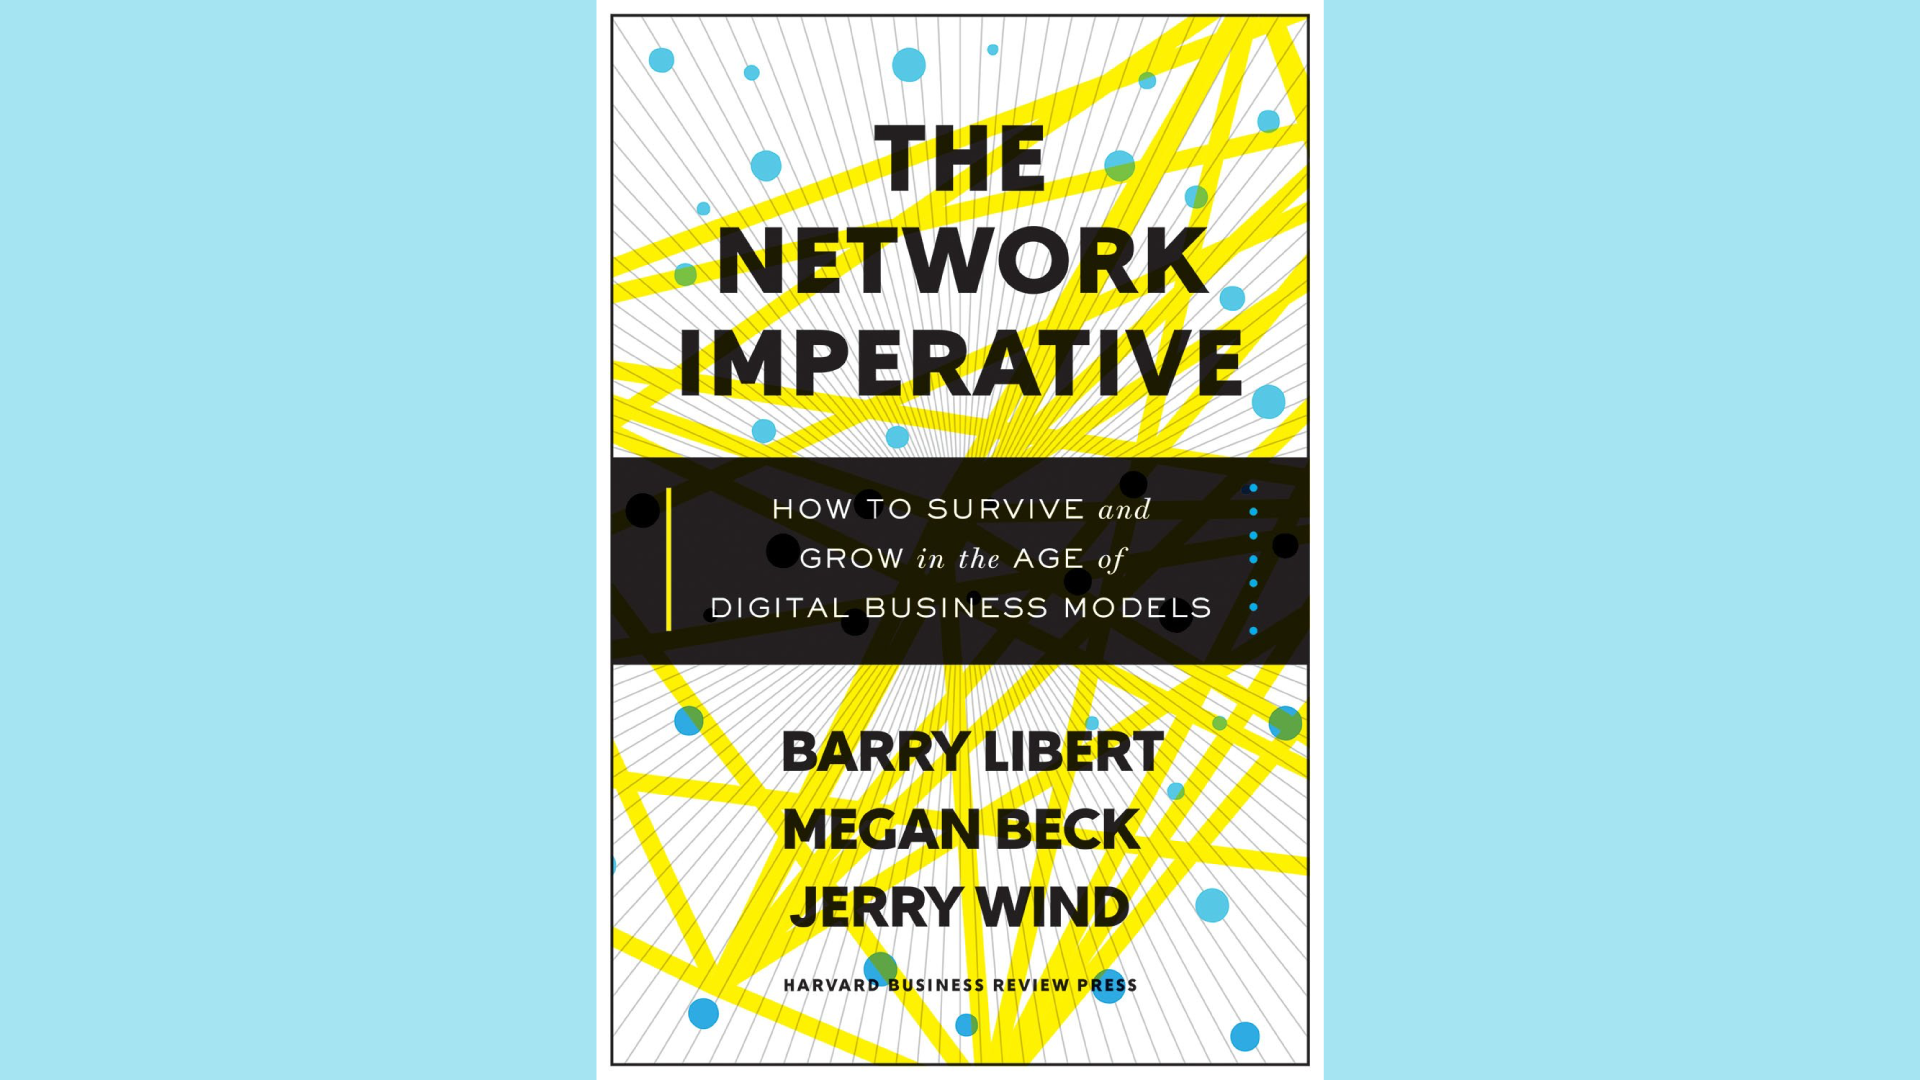 Summary: Network Imperative by Barry Libert